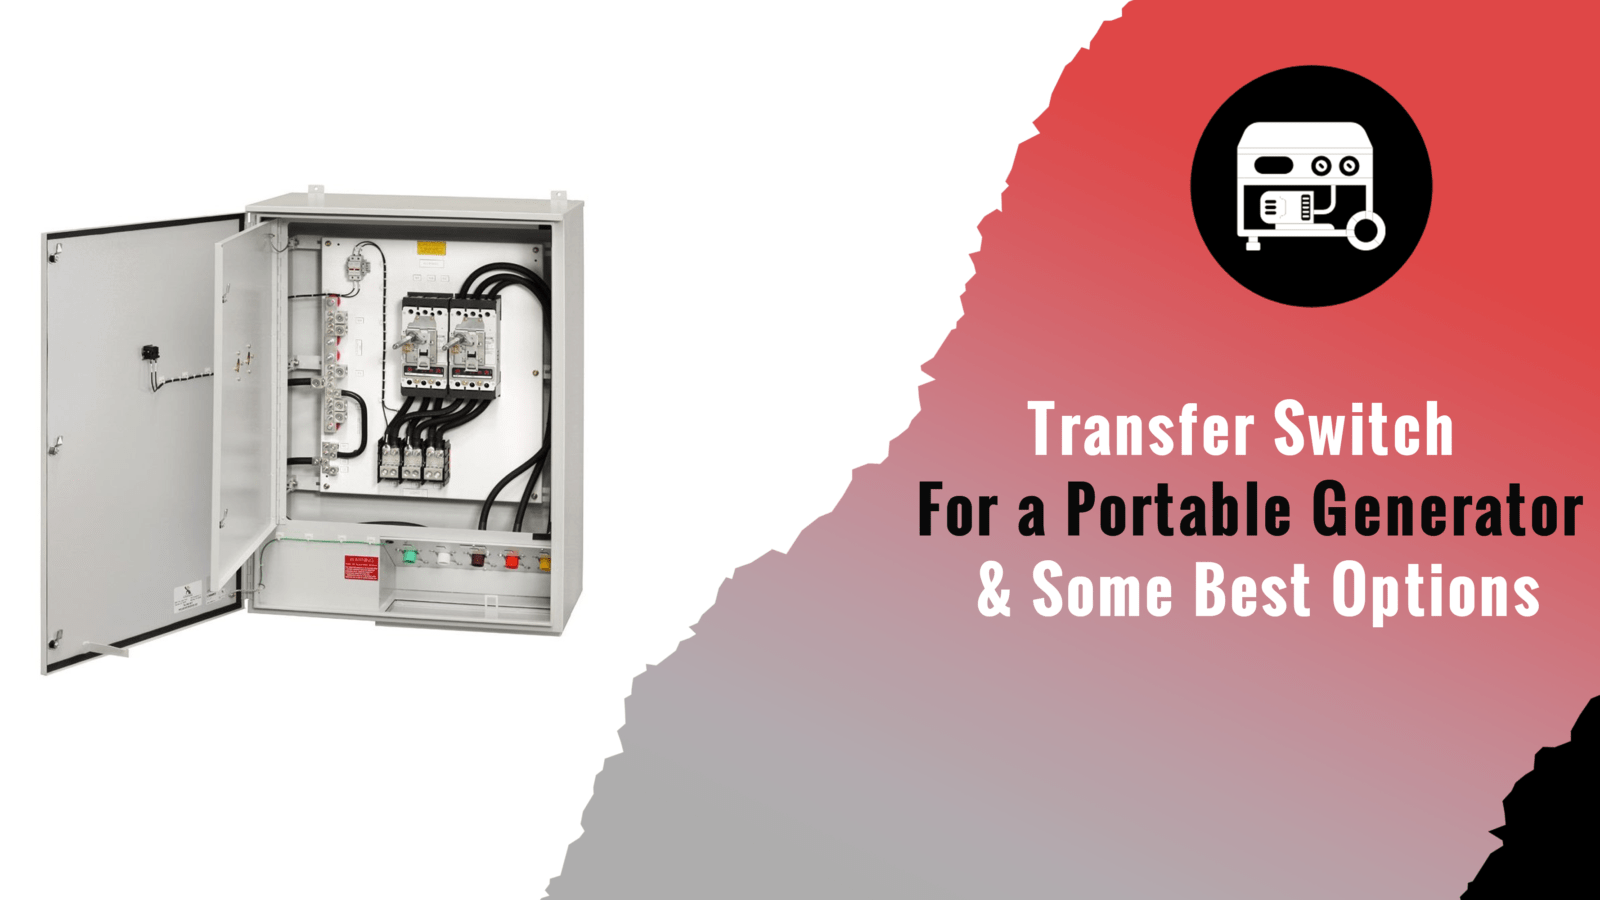 Transfer Switch For a Portable Generator & Some Best Options